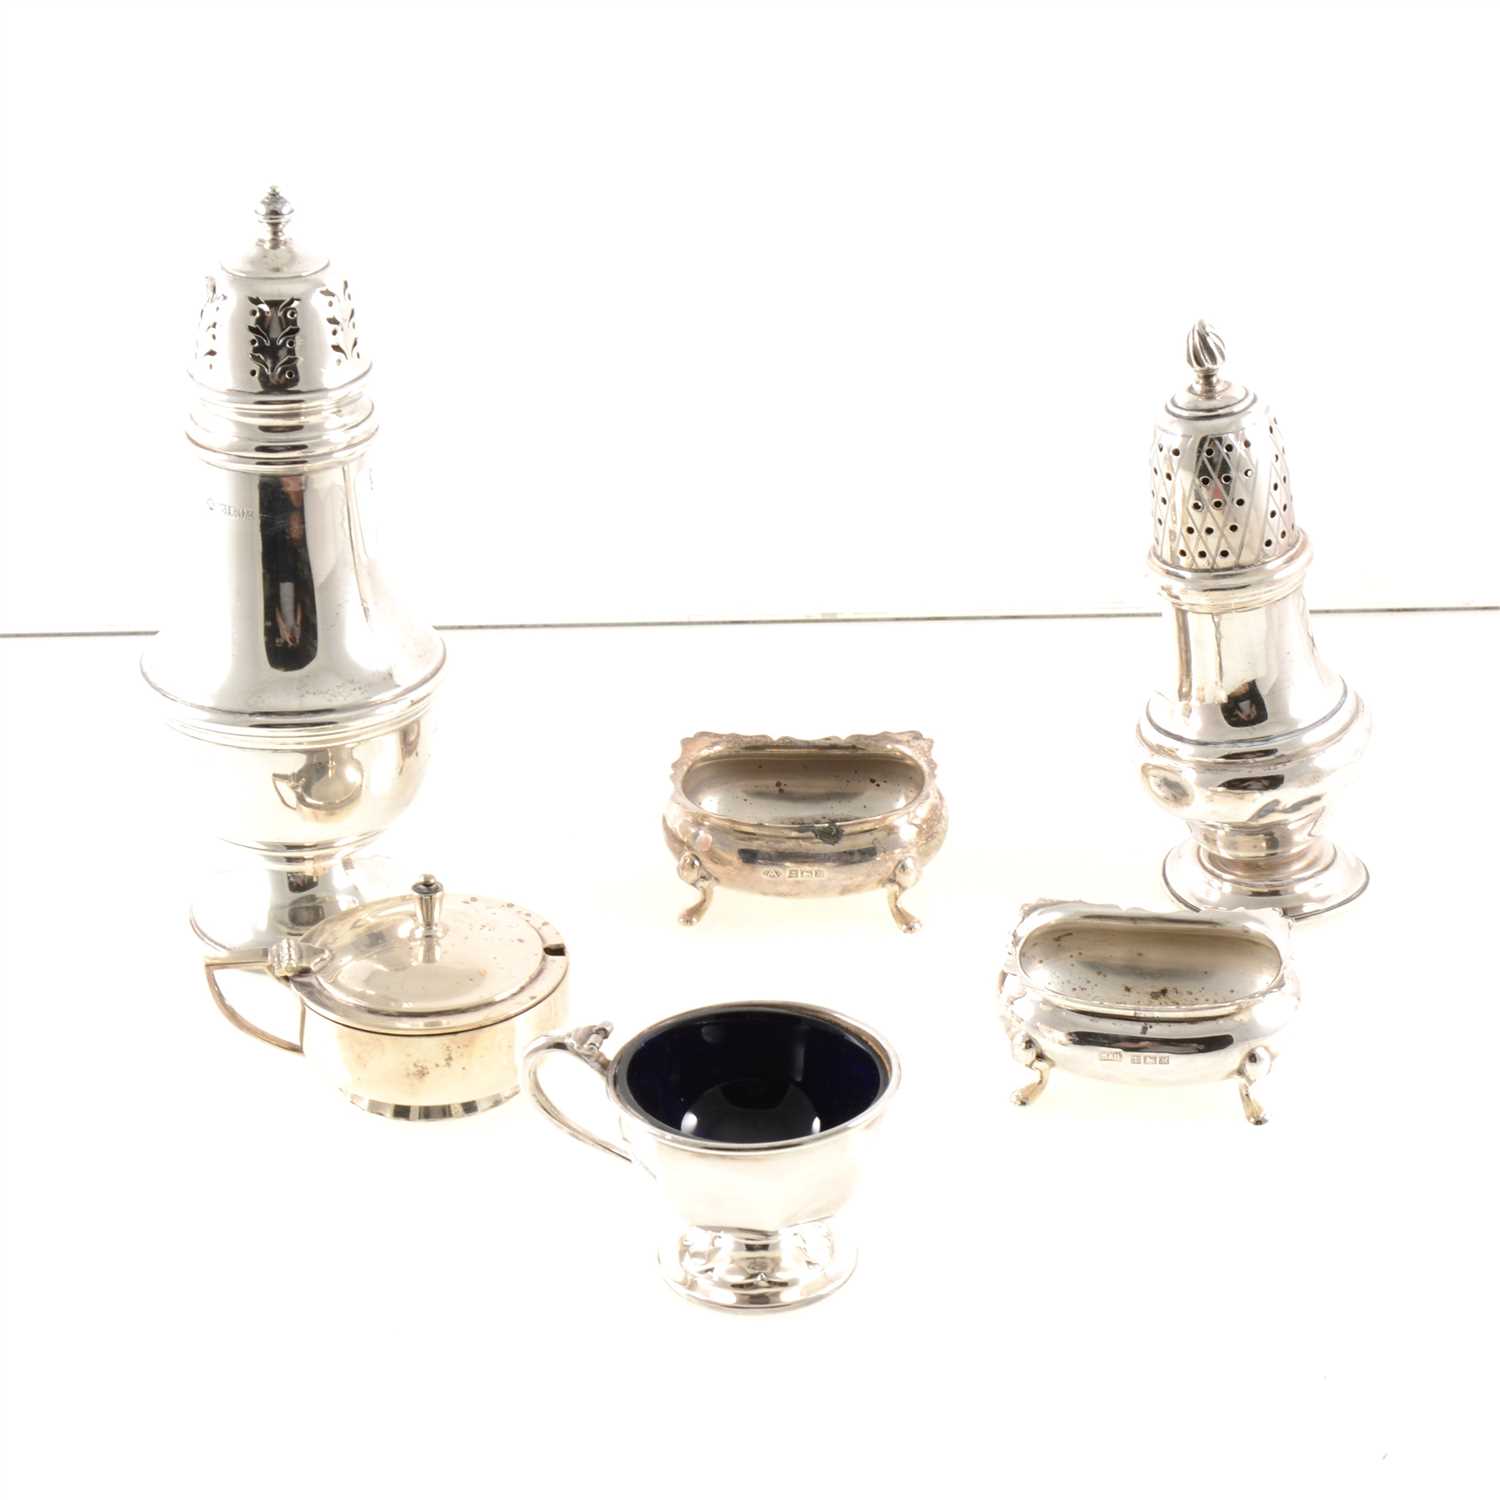 Lot 208 - A silver sugar caster by Adie Brothers Ltd, baluster shape, Birmingham 1961, 18.5cm, another by JB Chatterley & Sons Ltd, Birmingham 1961, various silver condiments (some with blue glass liners)